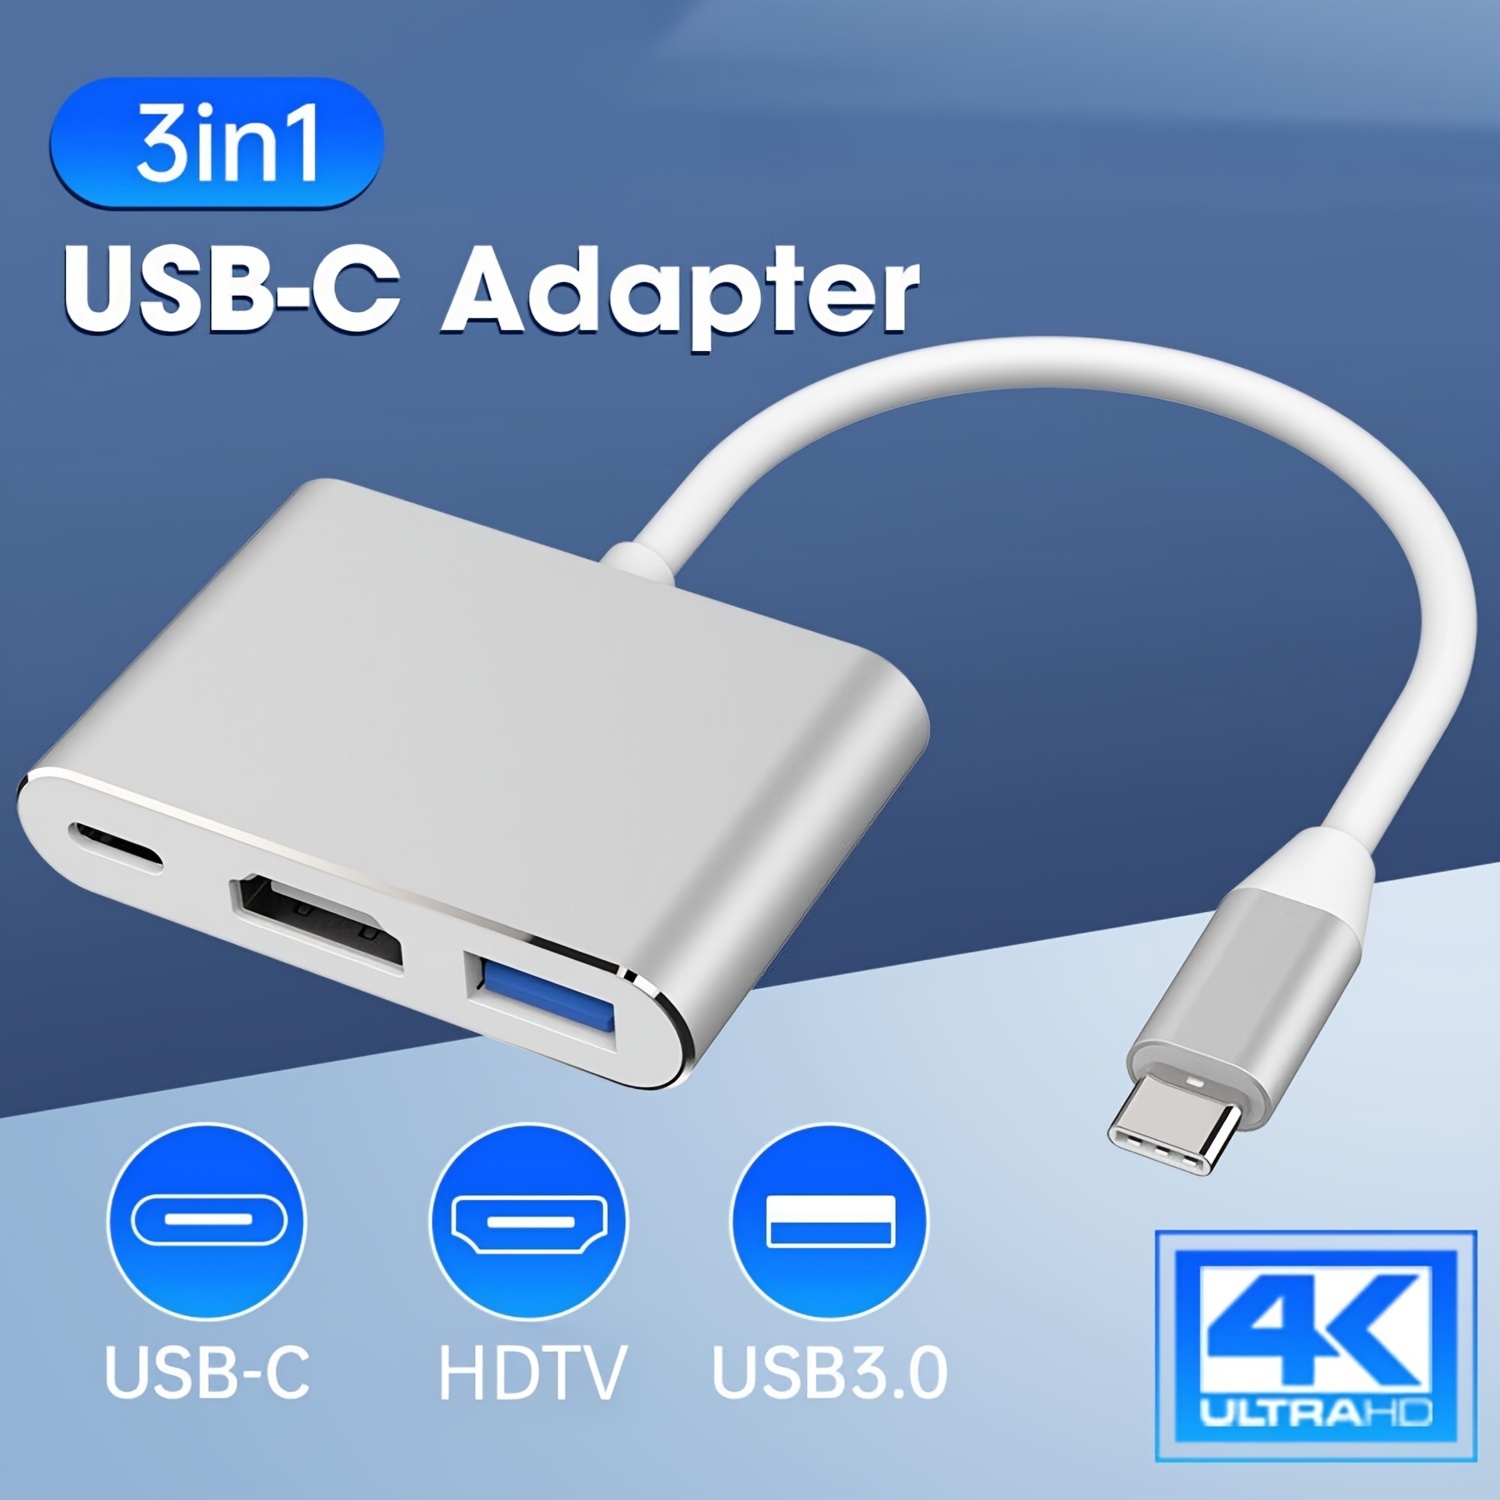 

Usb C To Adapter - 4k Multiport Av Converter For Macbook Pro/air, Ipad Pro - With Usb C, Usb 3.0 And Hdtv Ports